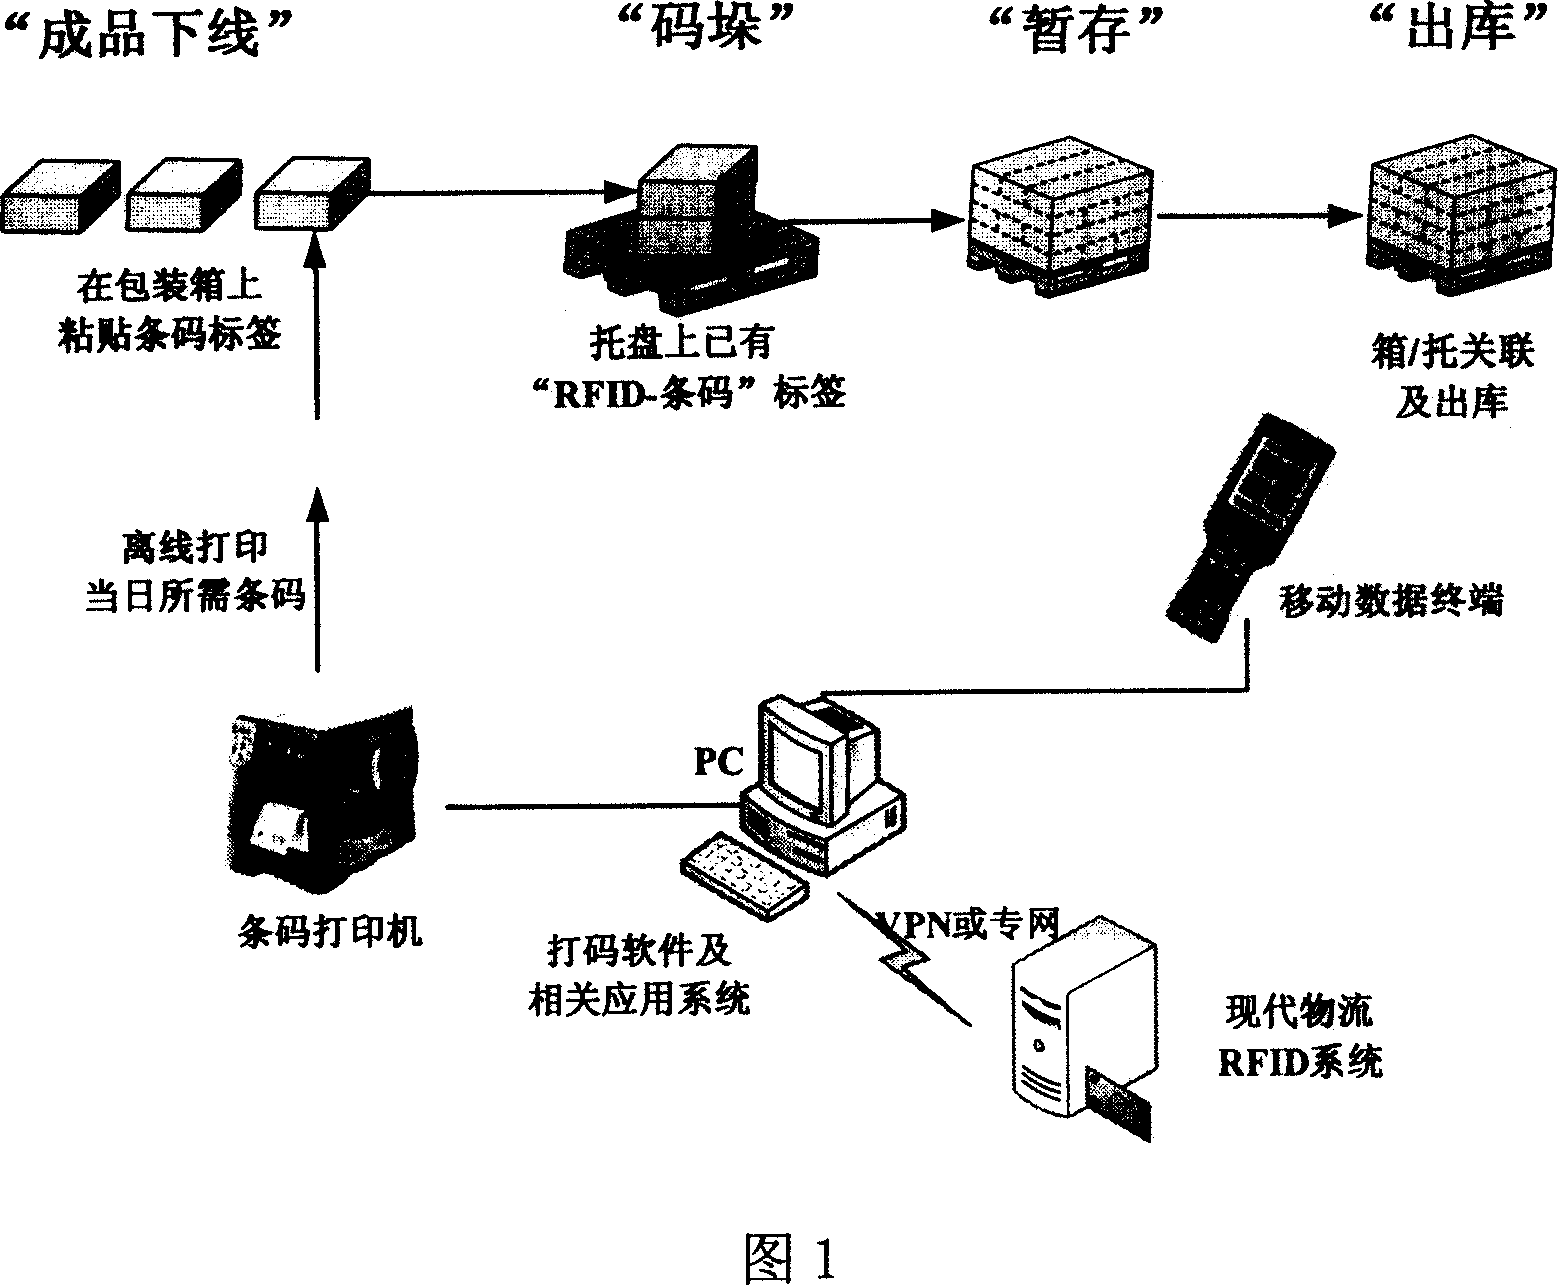 Process for applying electronic label radio-frequency technique to storage bracket tray